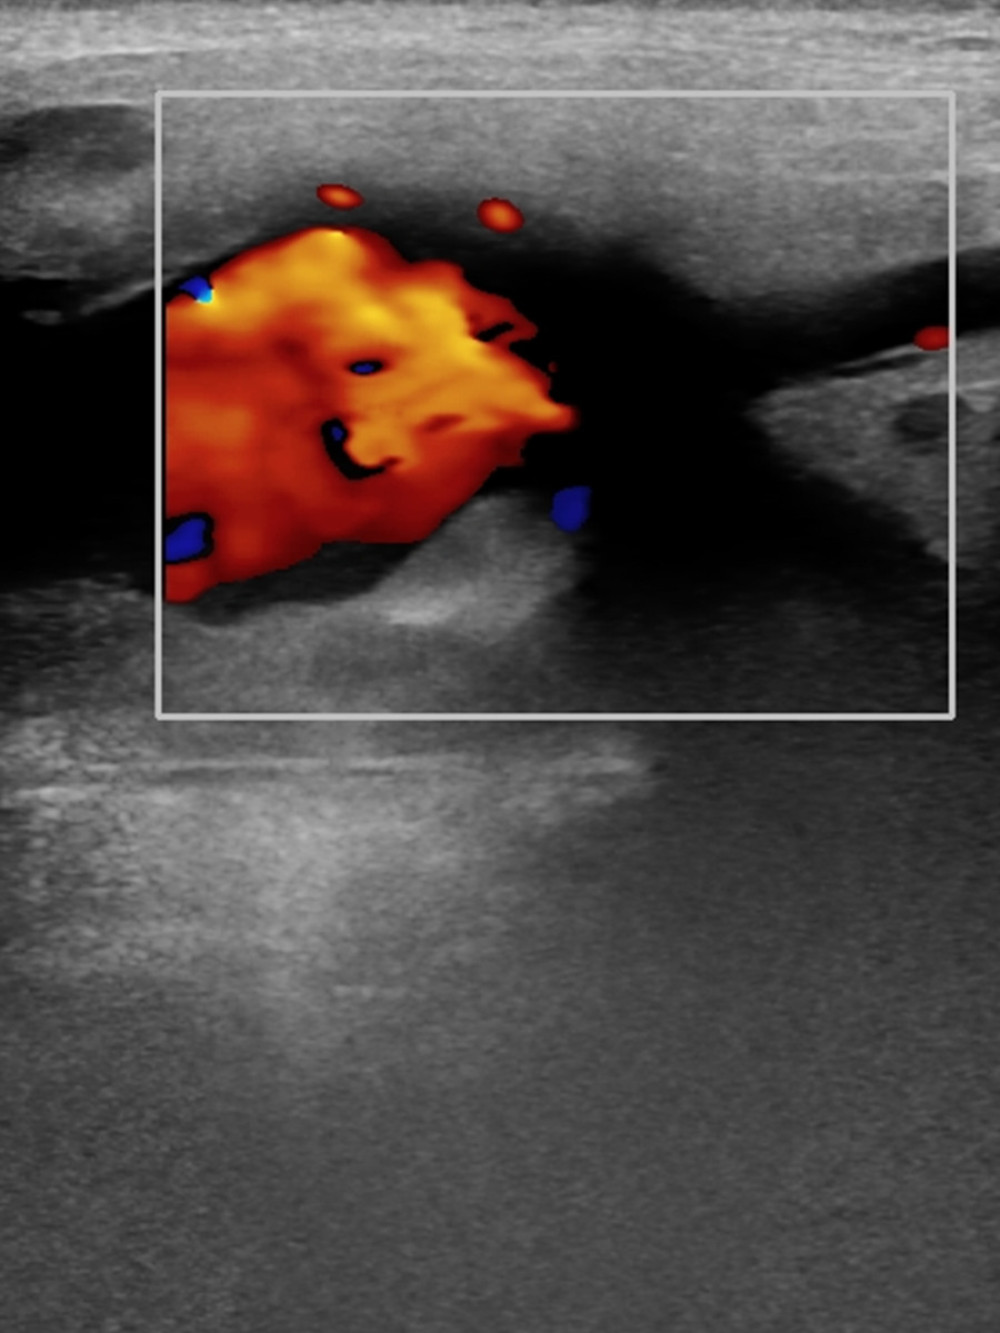 Ultrasonography of the left salivary gland showing aneurysmal dilatation of the left maxillary artery with turbulent flow of blood inside.